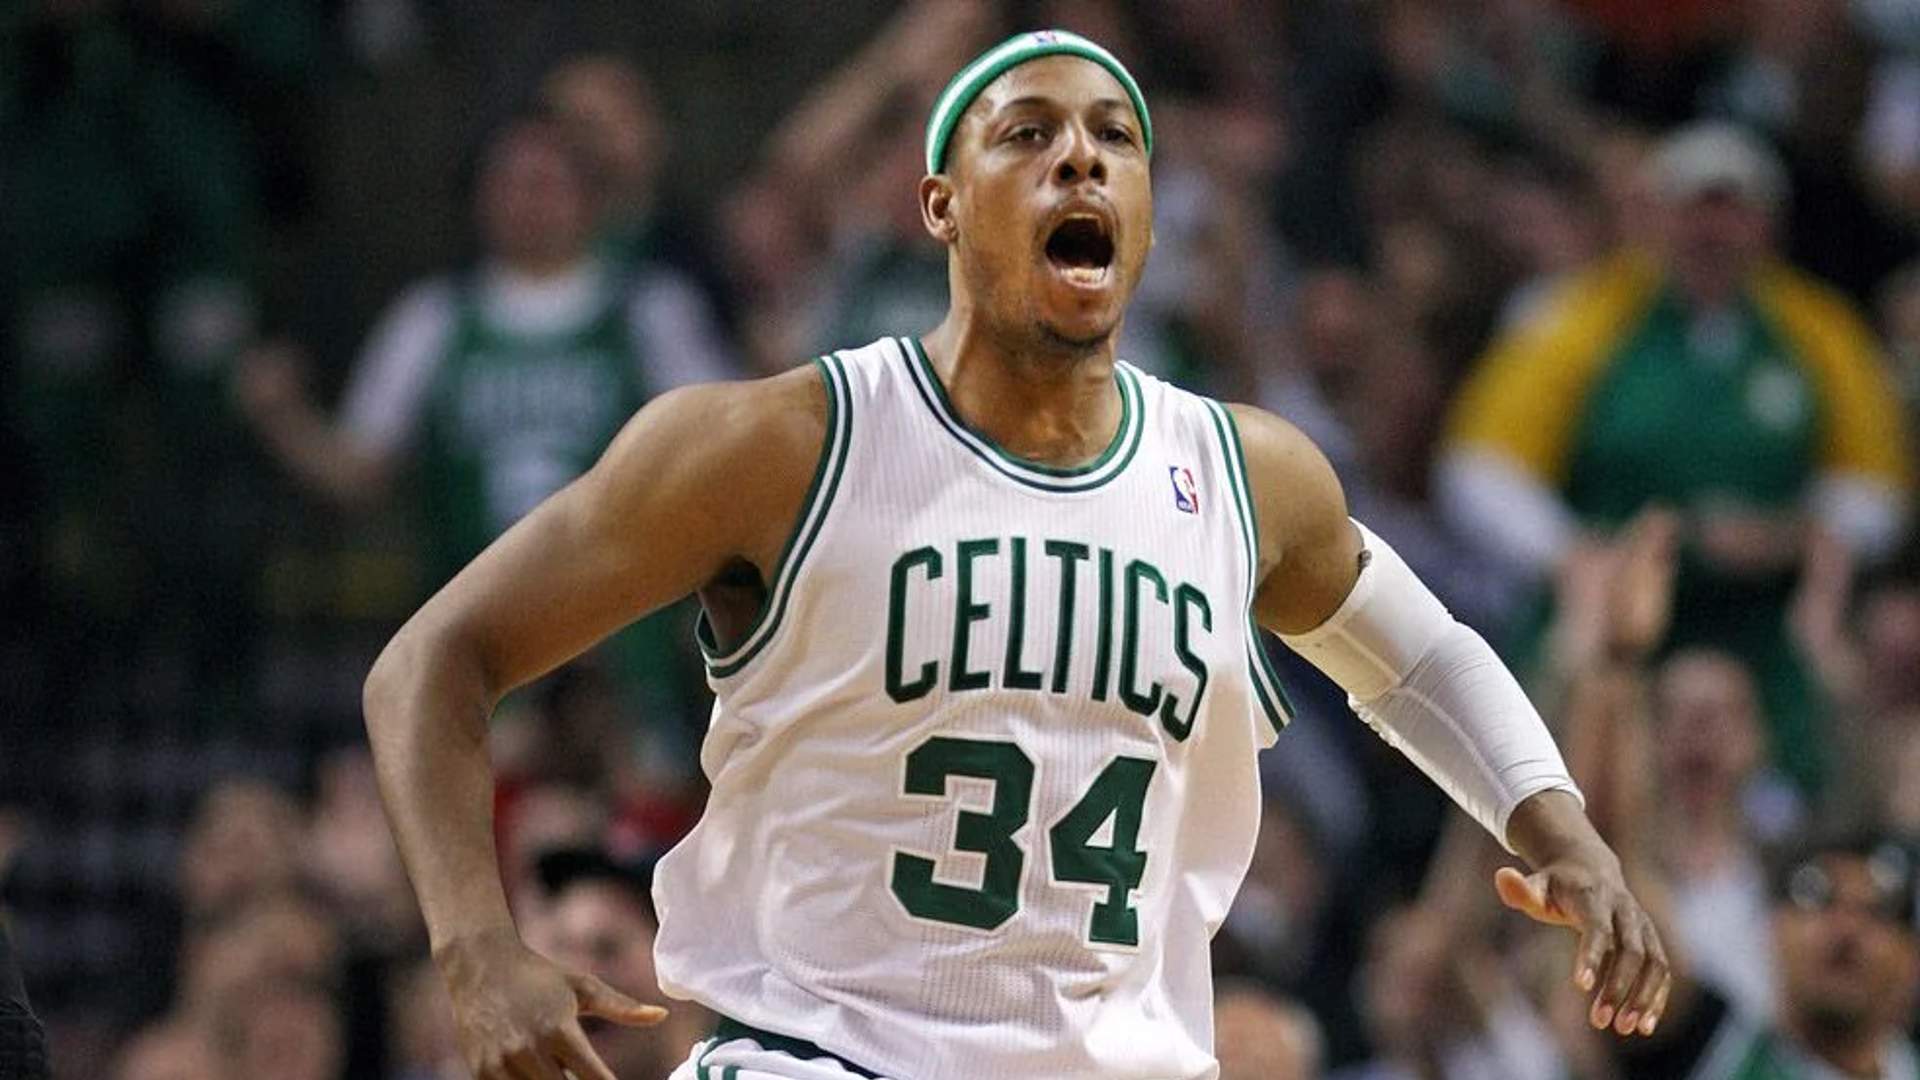 Paul Pierce in a file photo. (Image credits: twitter)